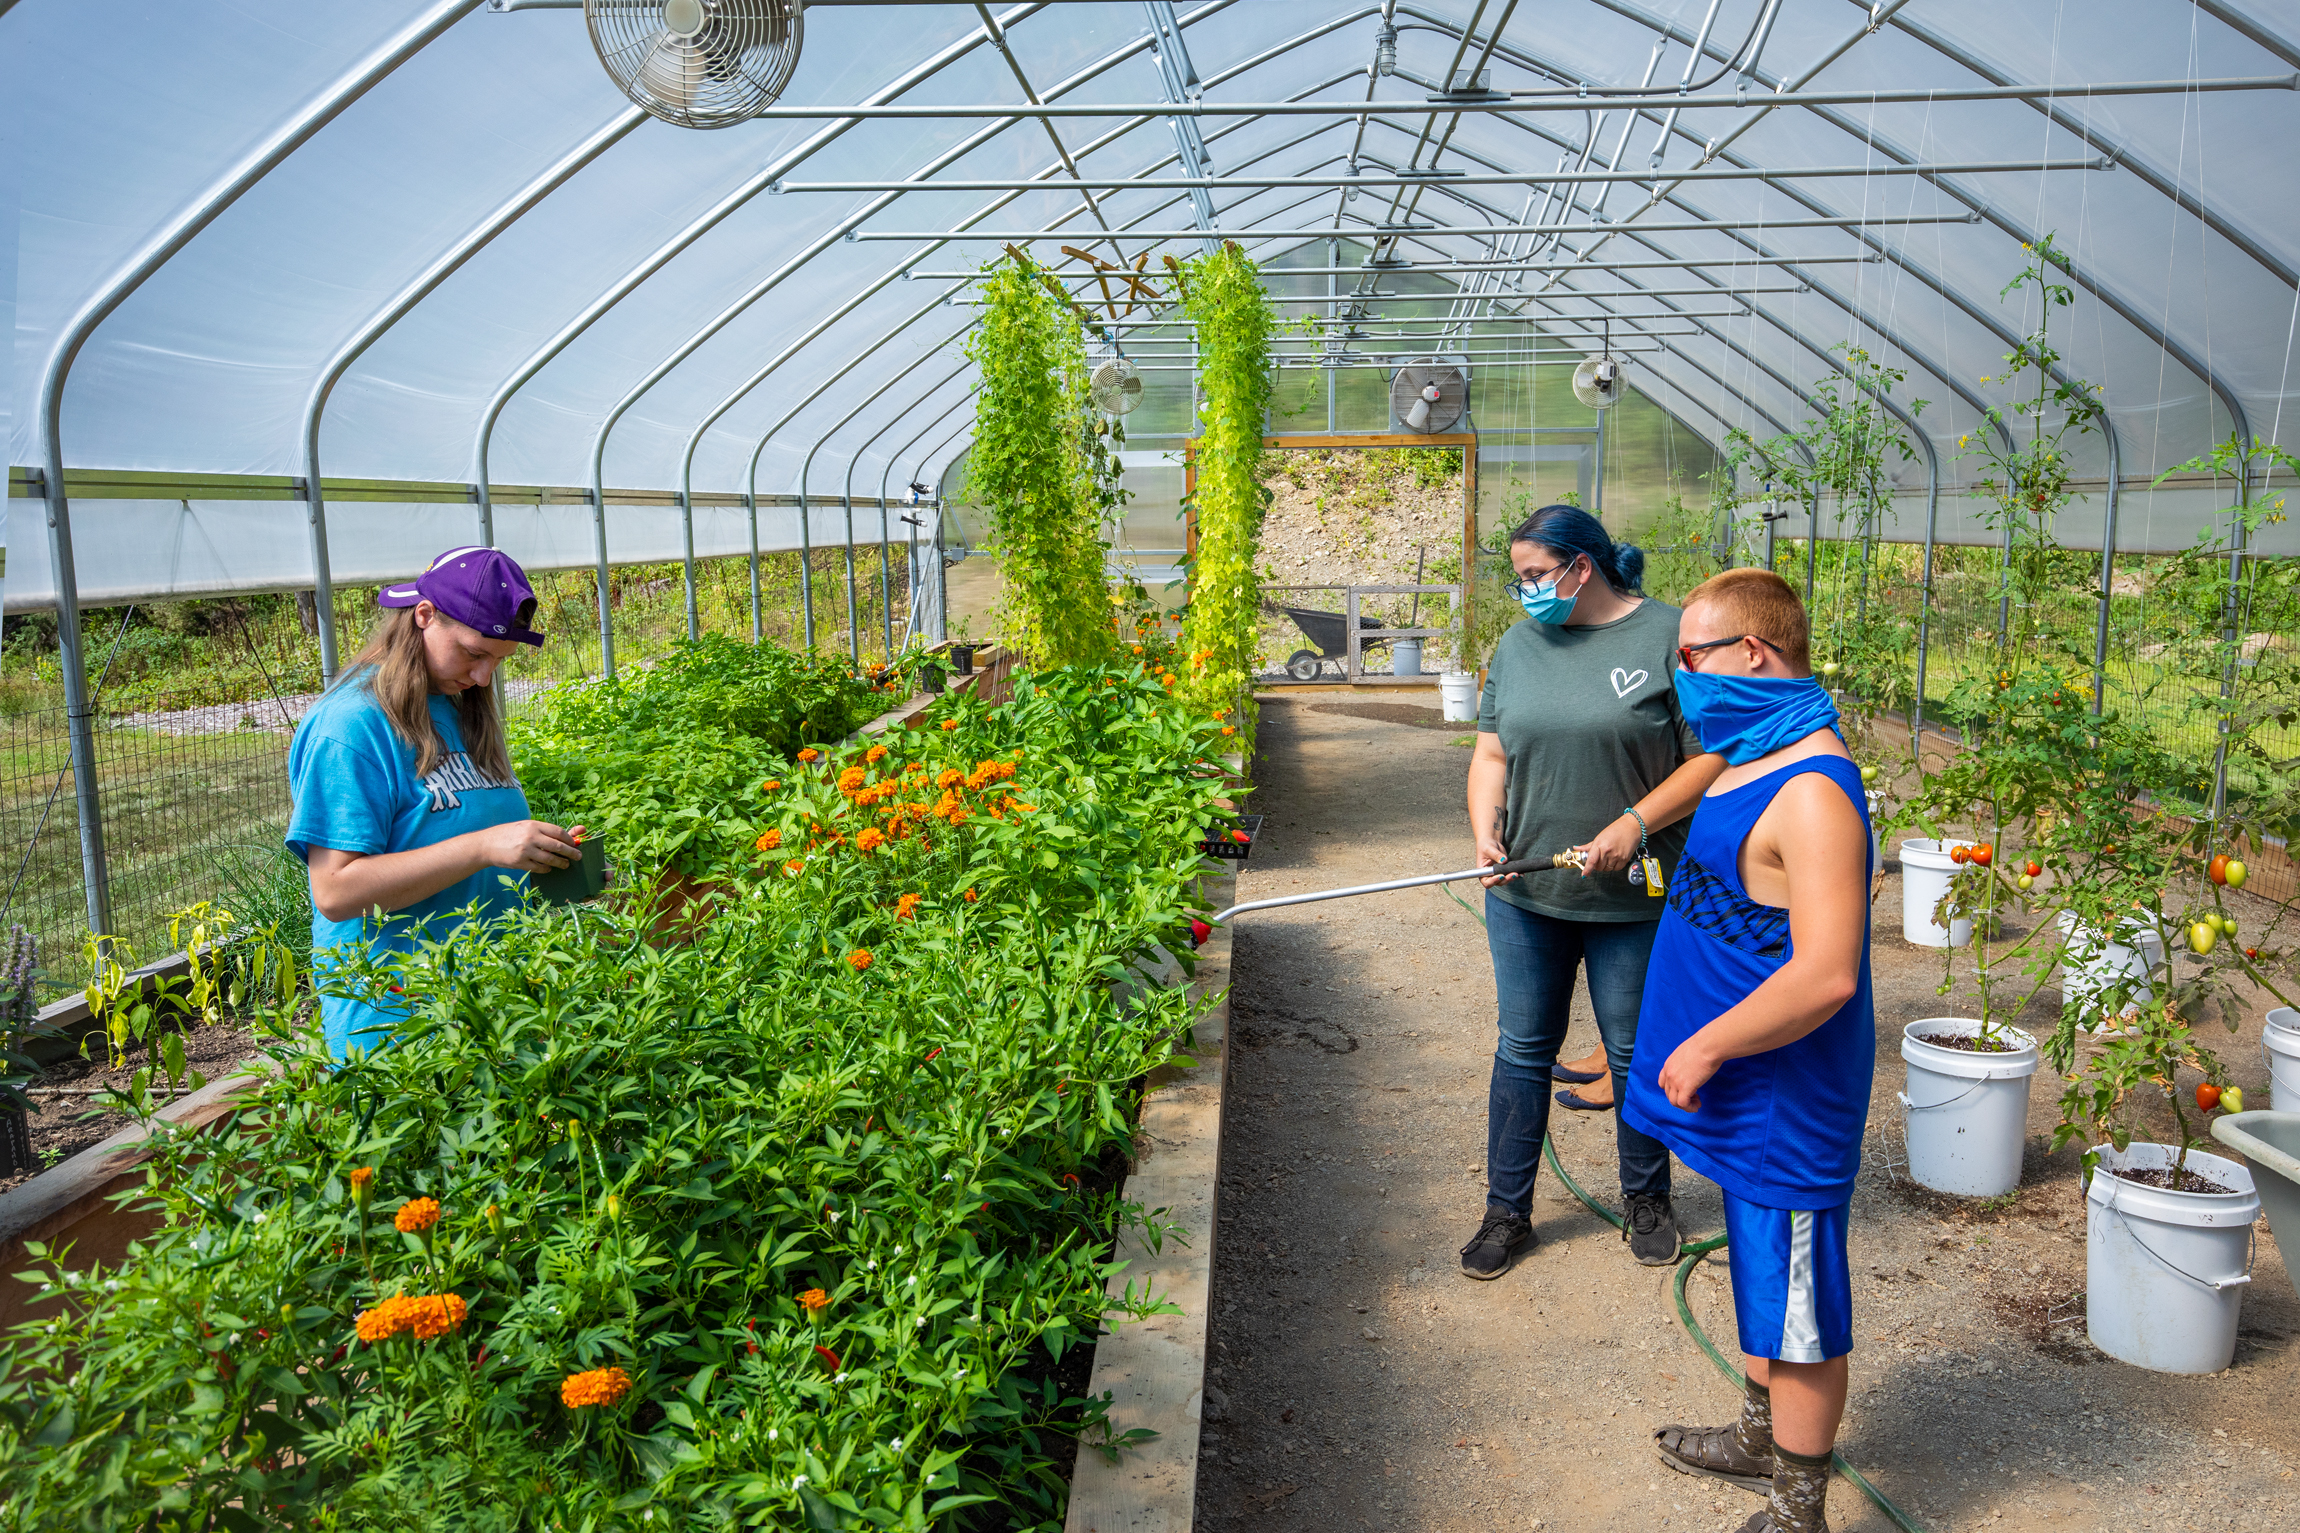 Therapeutic farming offers time to grow in the greenhouse.